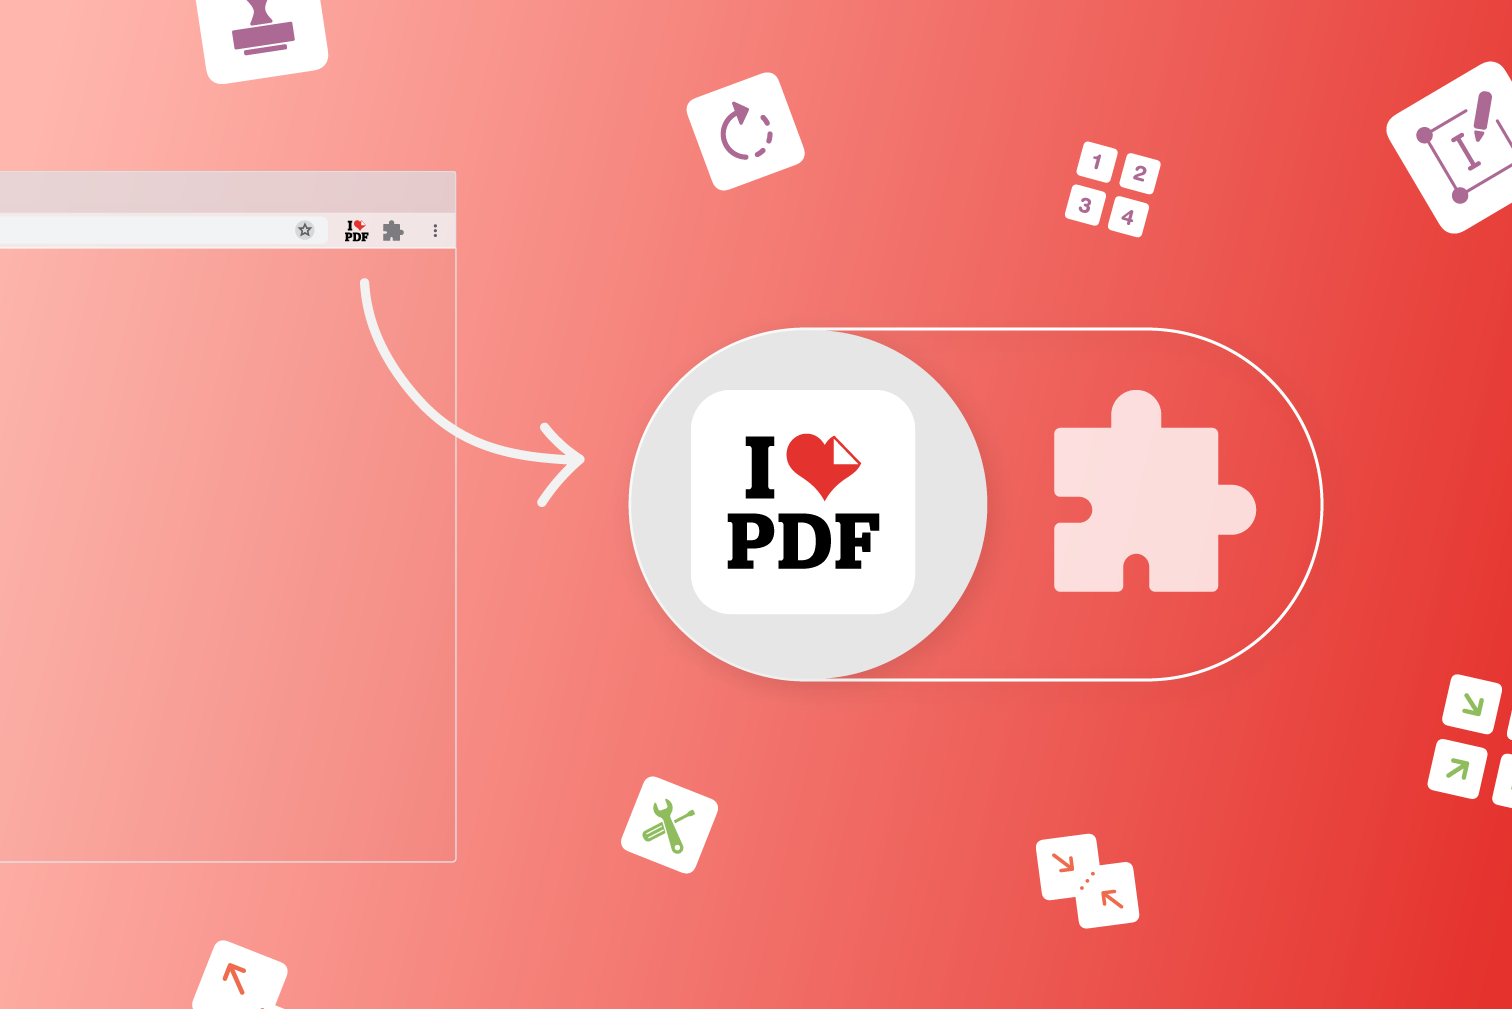 Download the free PDF extension for Chrome by iLovePDF